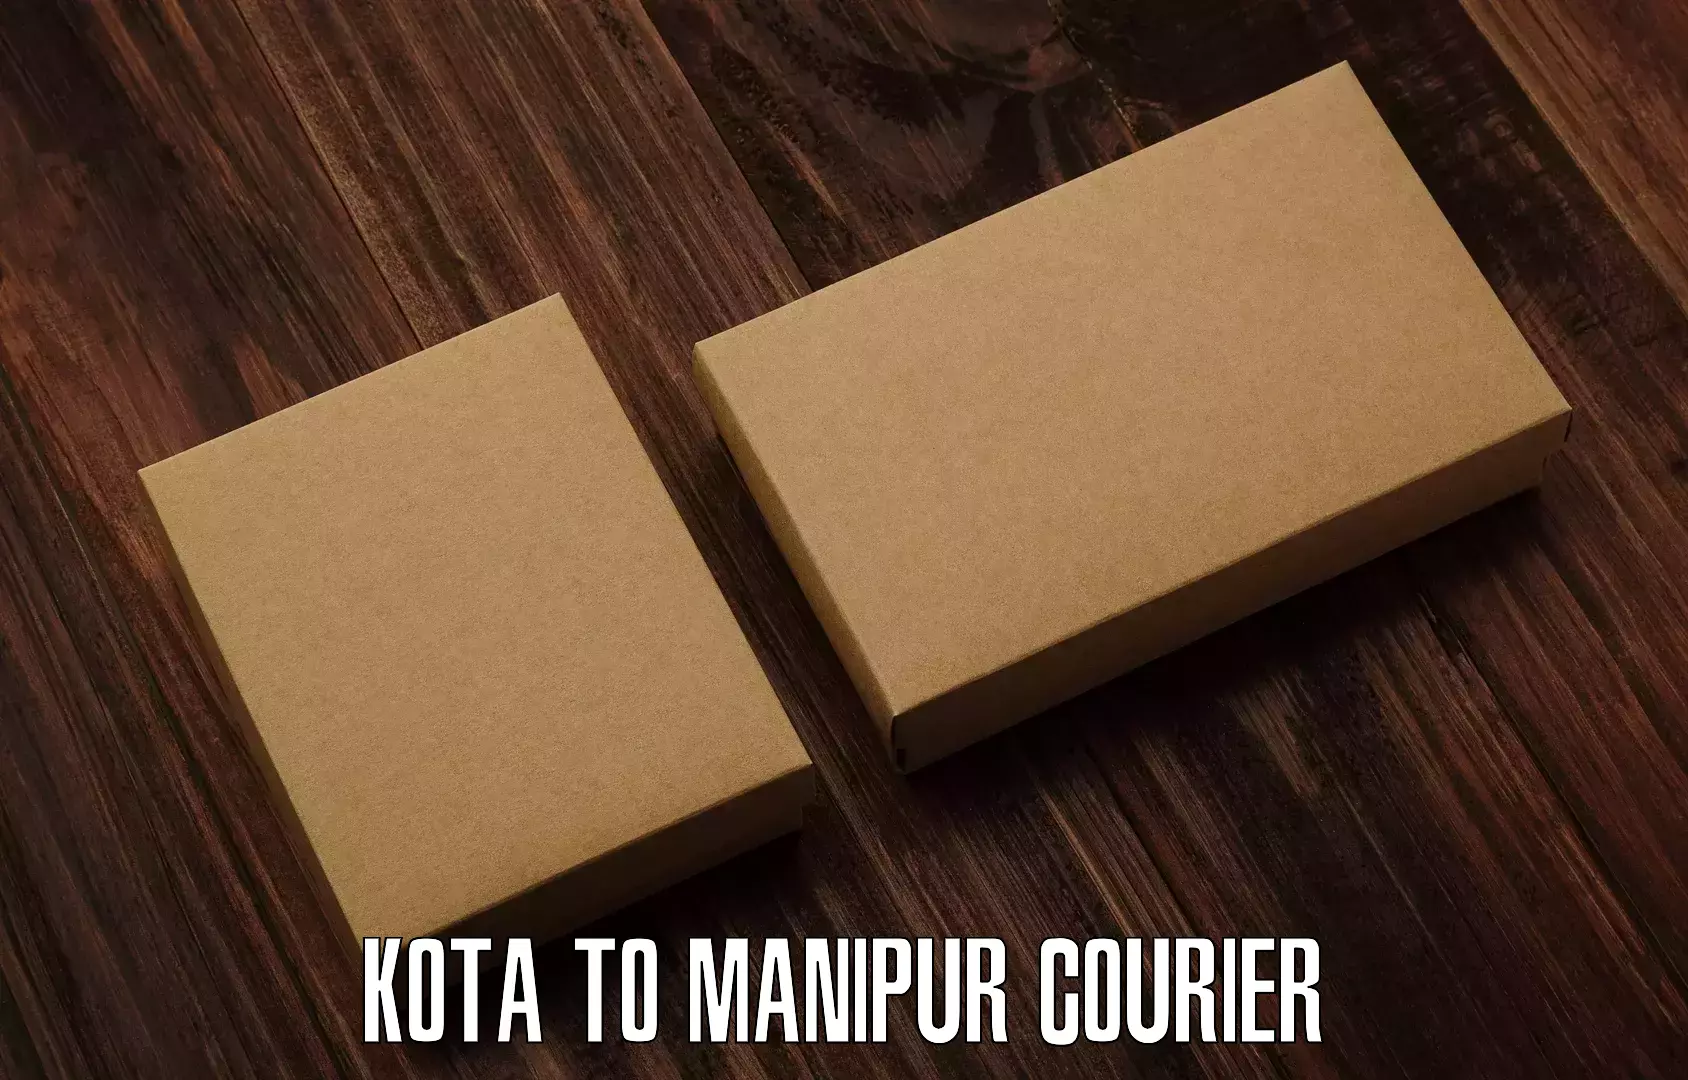 Next-day delivery options Kota to Moirang